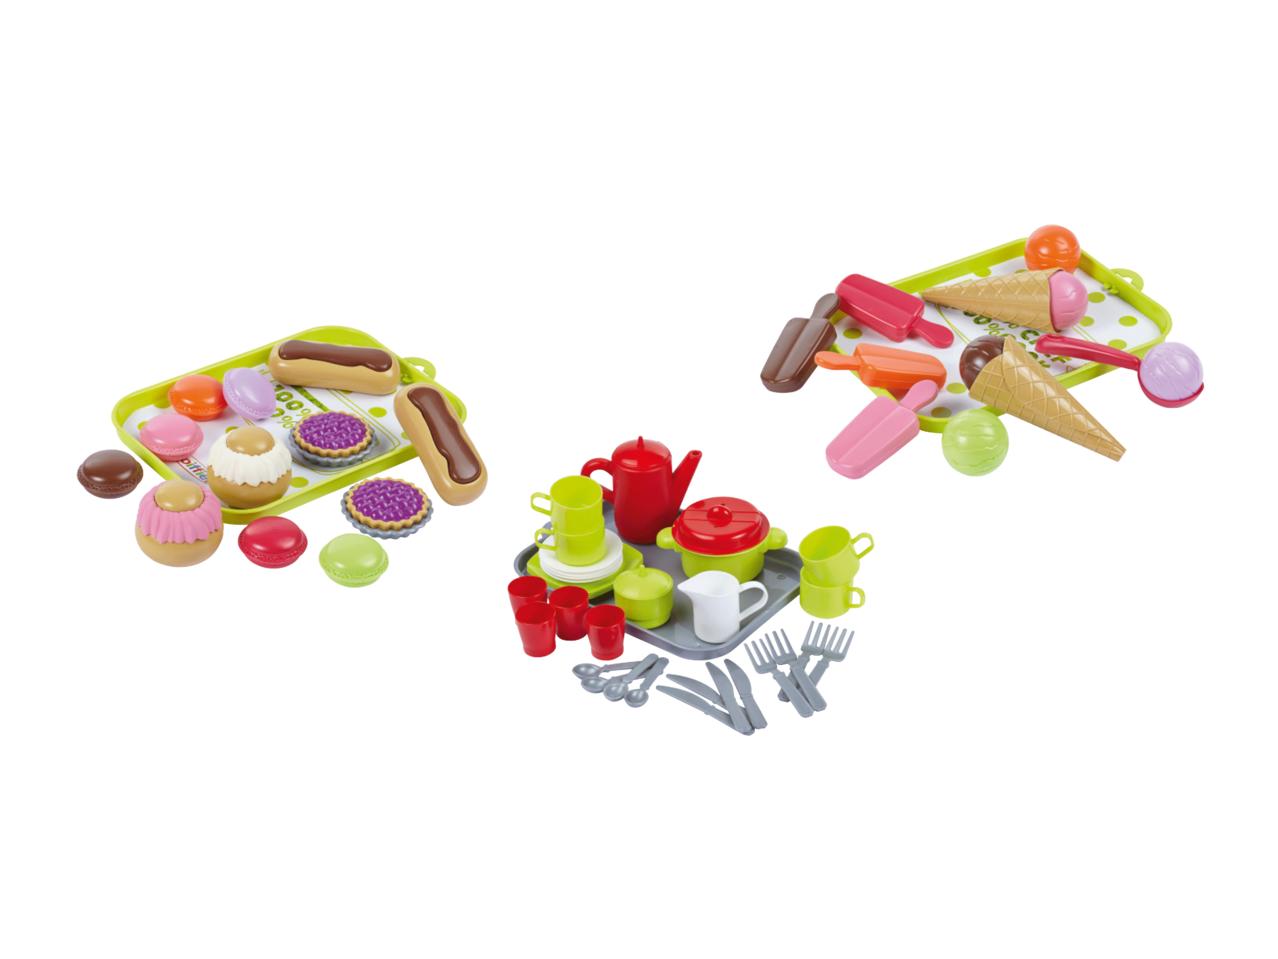 ECOIFFIER Plastic Food/Cutlery Sets